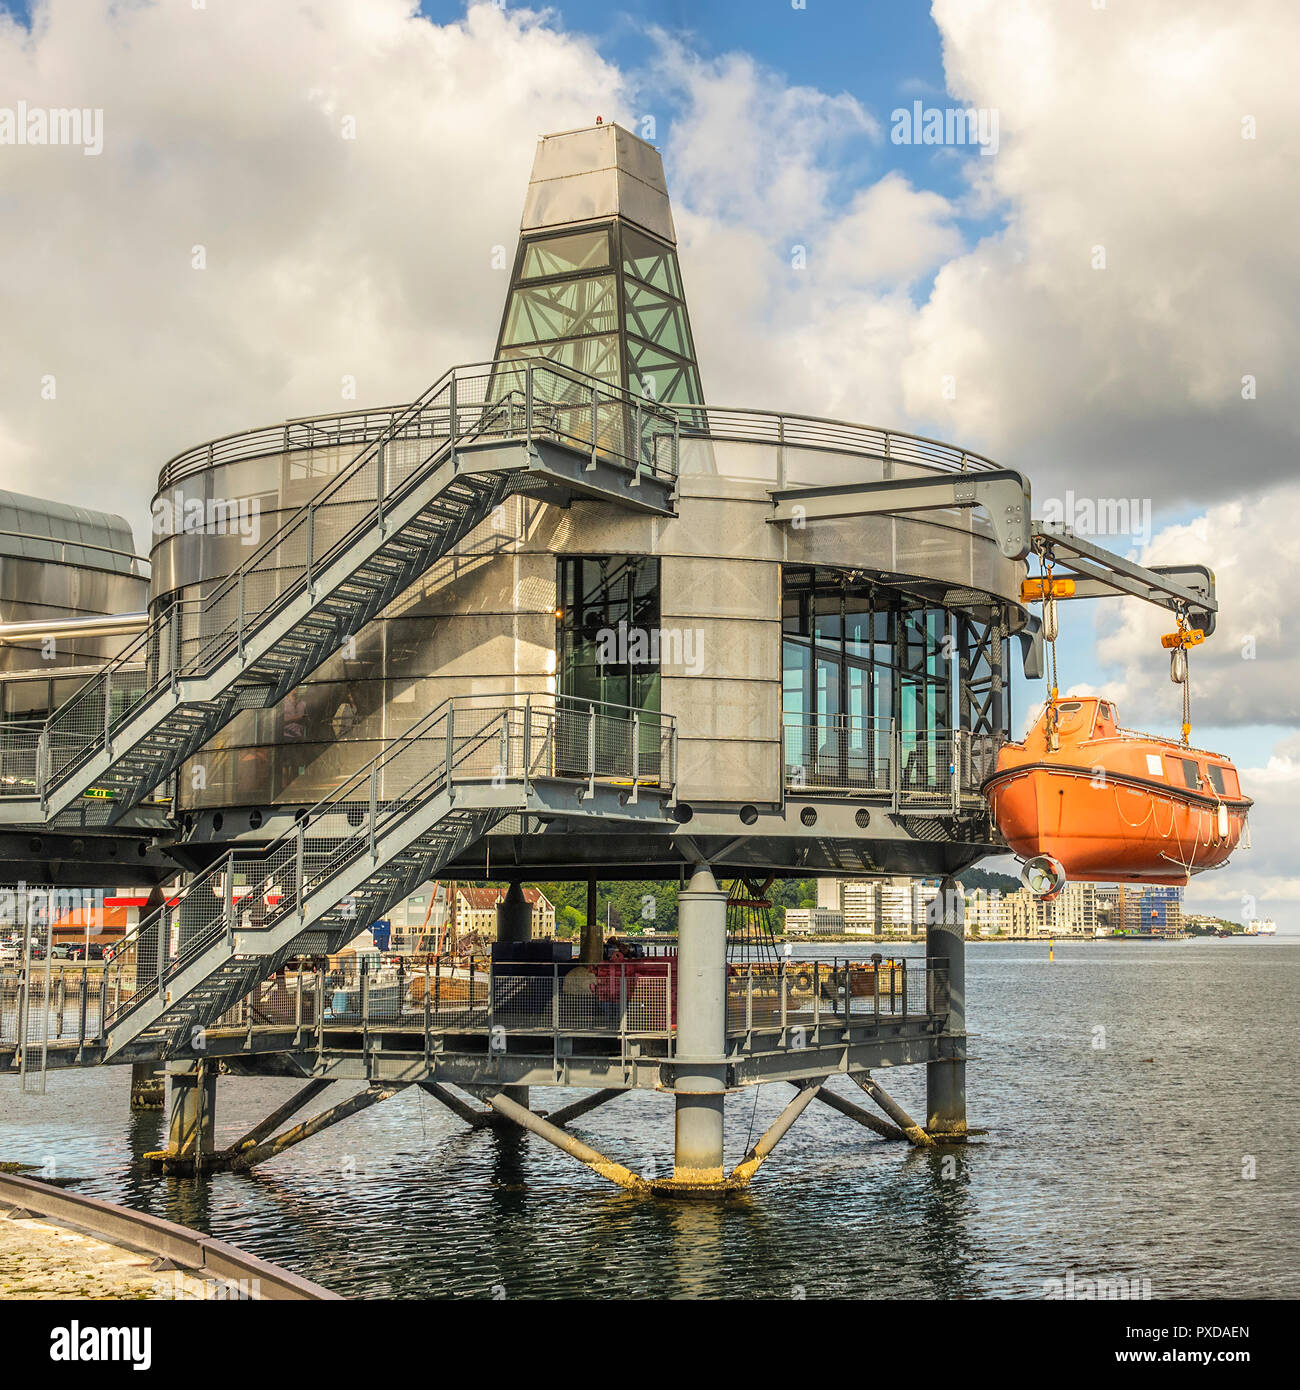 The Oil Museum At Stavanger Norway Stock Photo